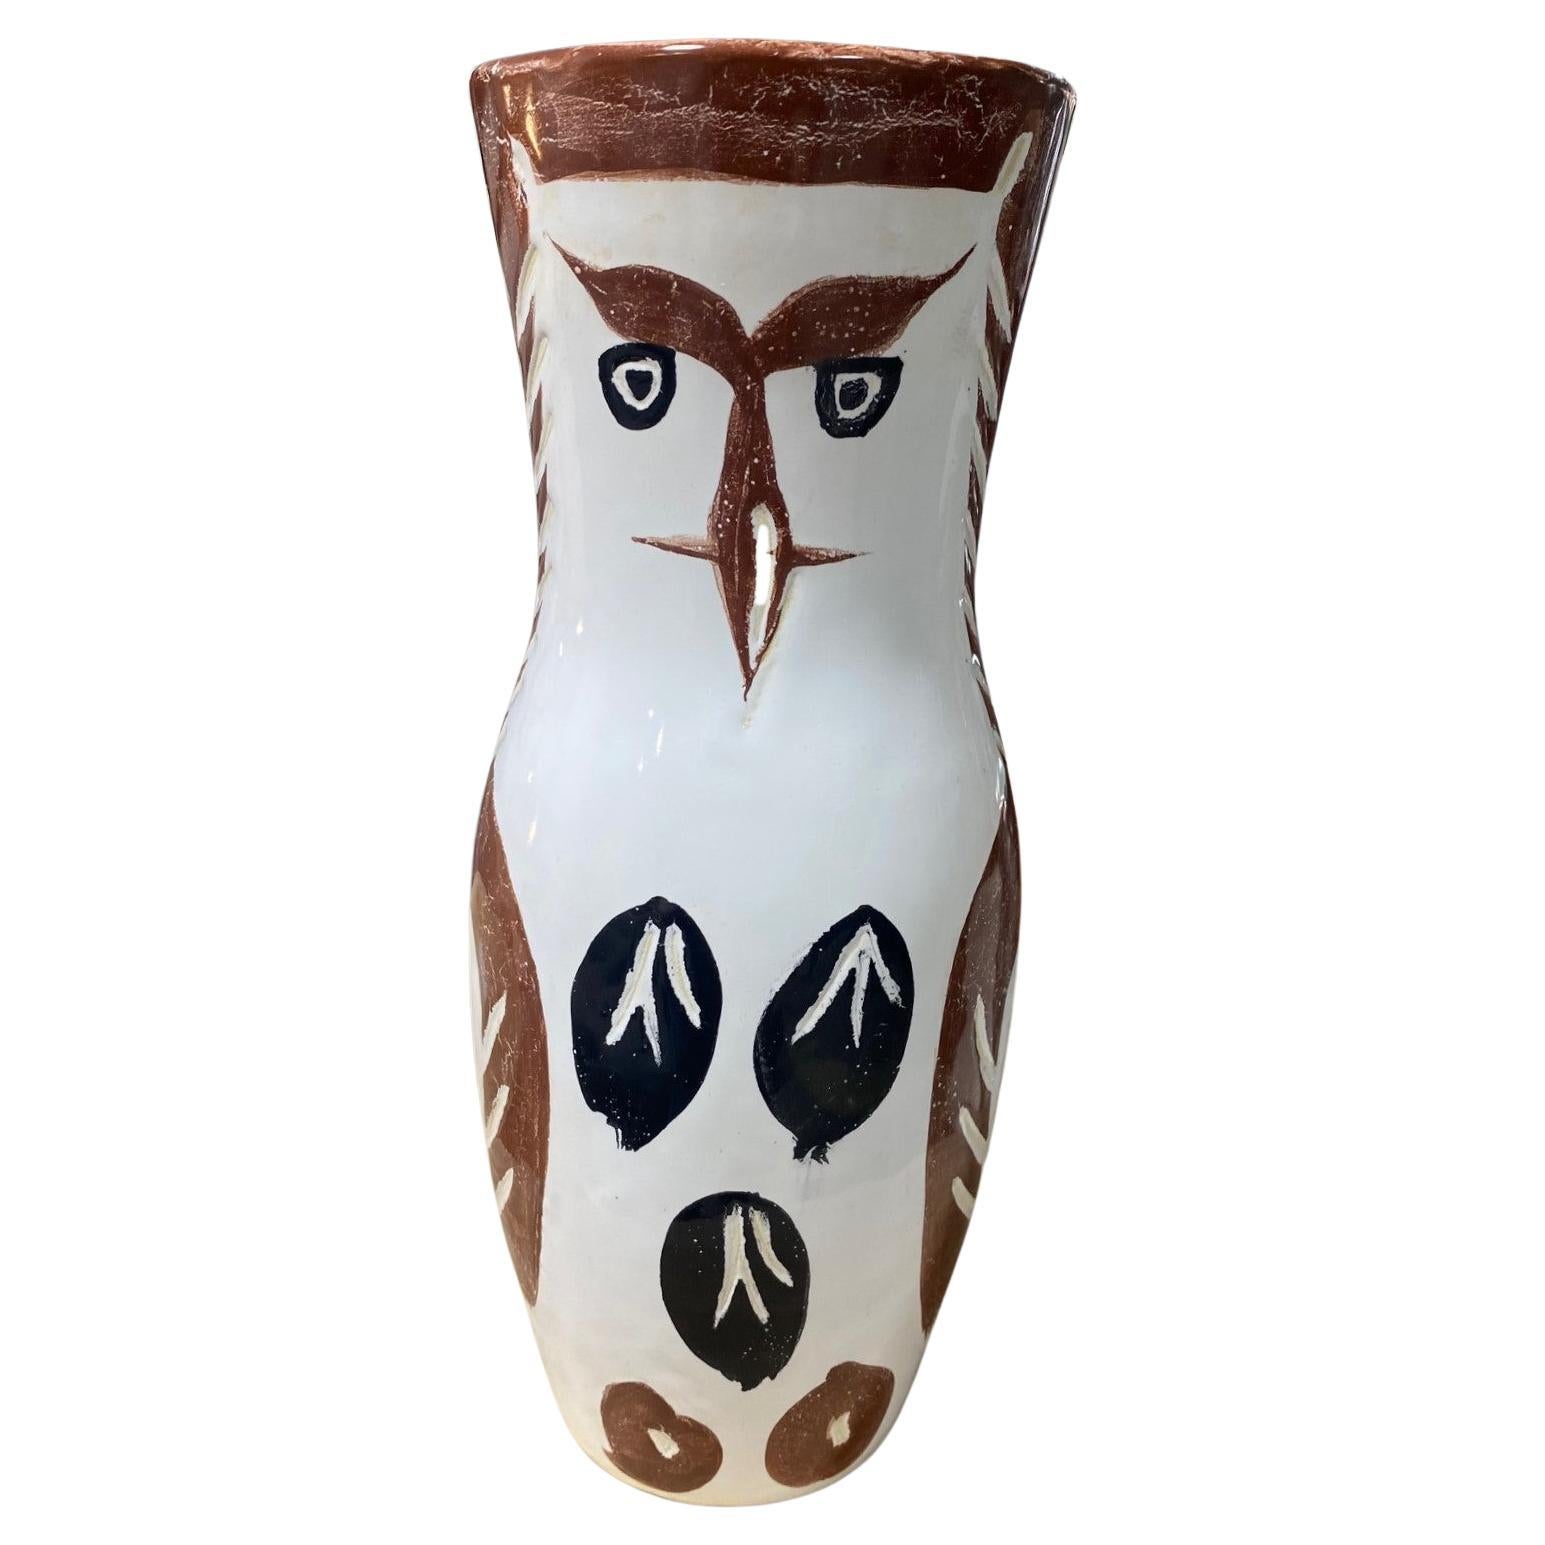 Pablo Picasso Signed Limited Madoura Pottery Chouetton Owl Vase A.R. 135, 1952 For Sale